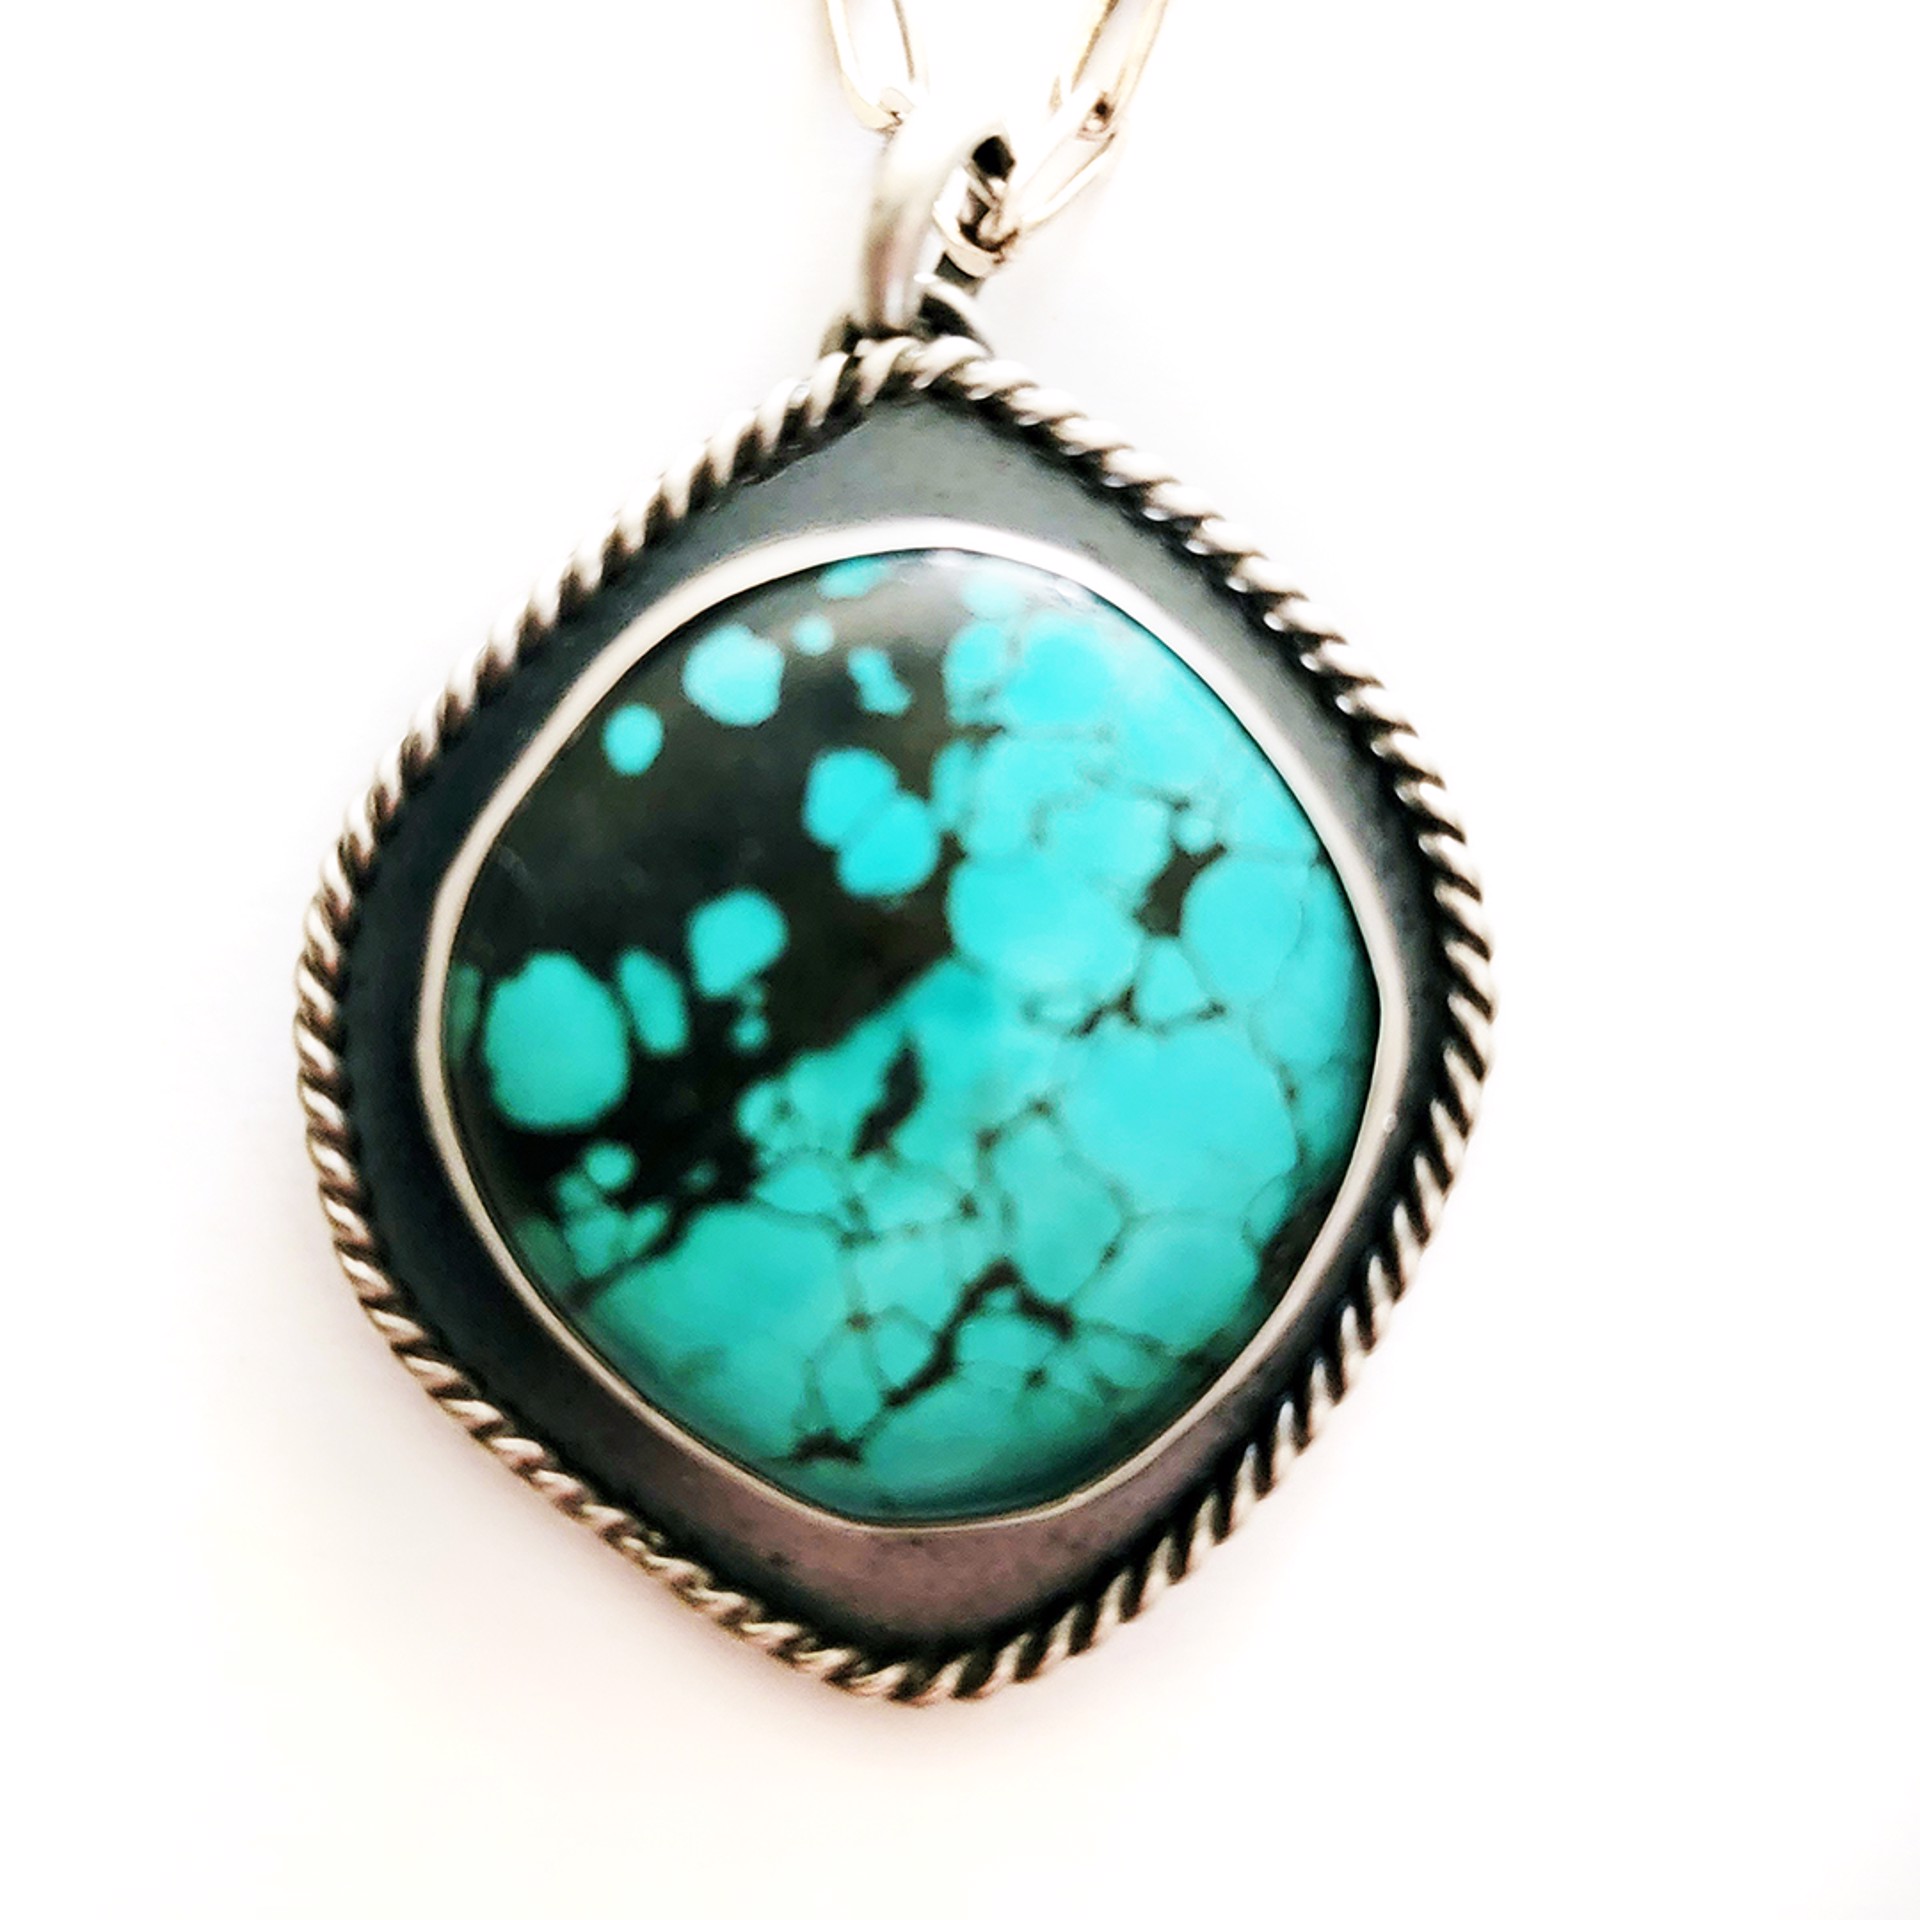 Turquoise Pendant with Silver Chain by Kay Seurat